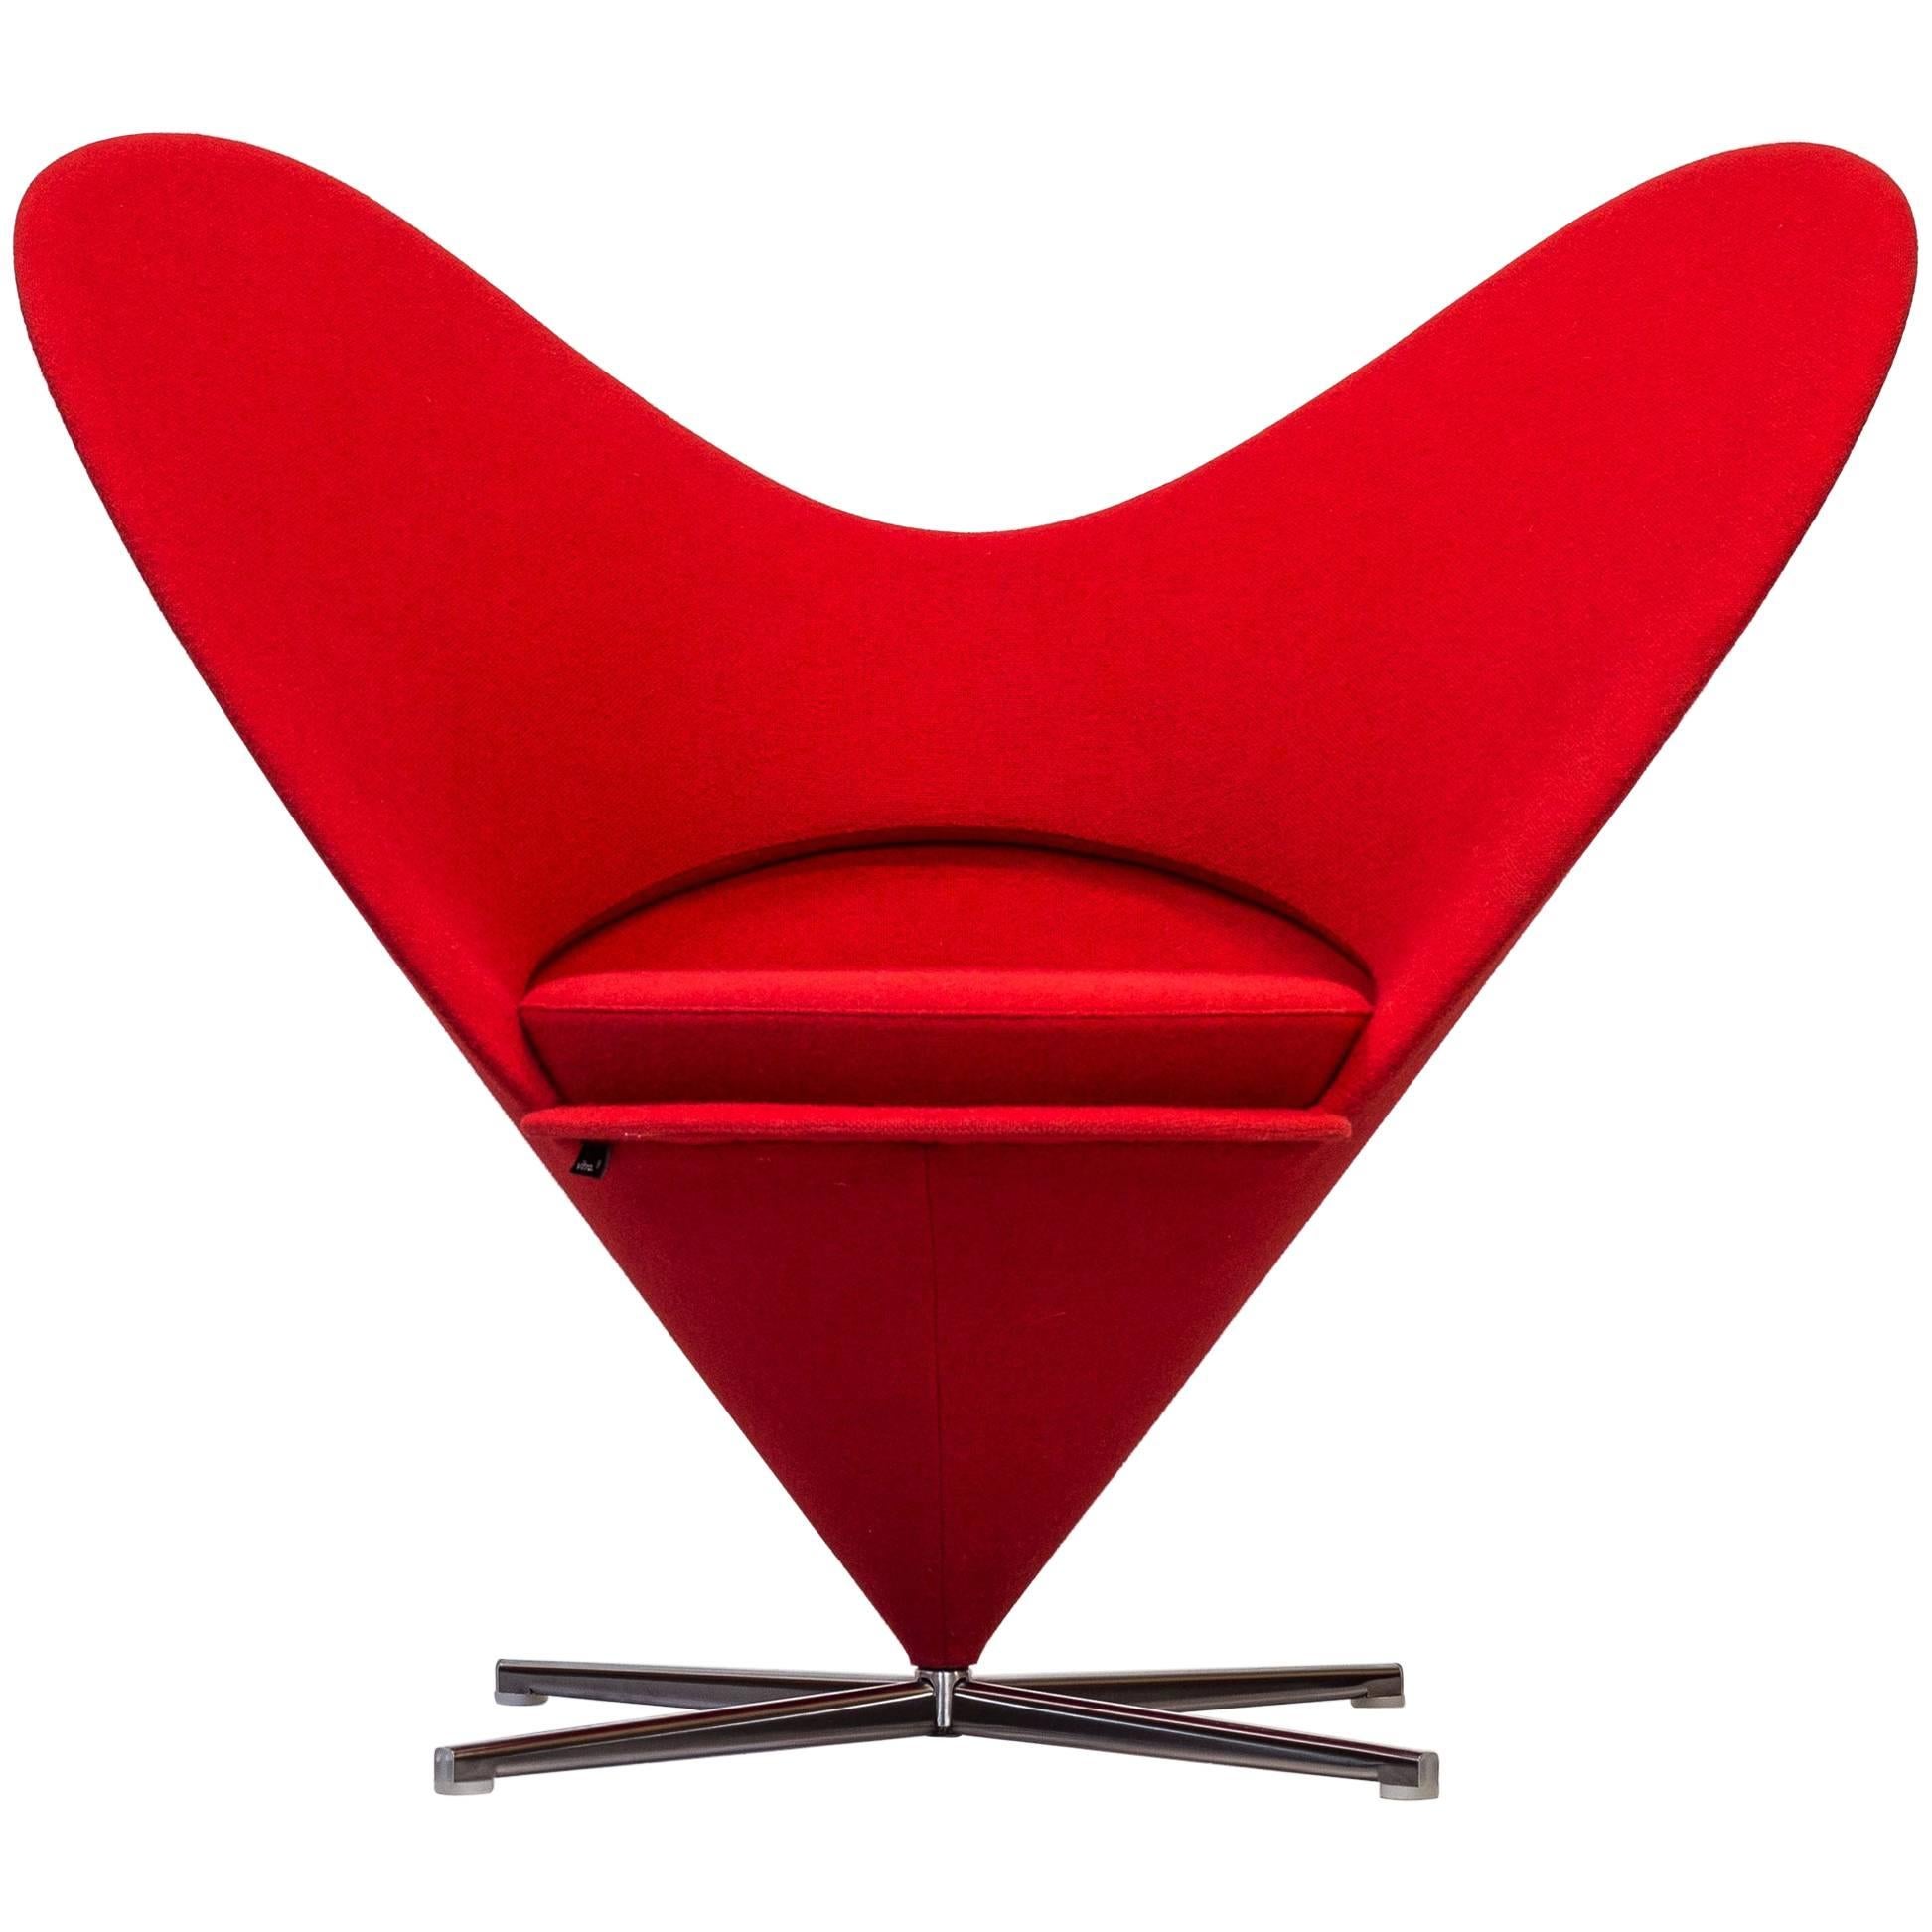 "Heart Cone" Chair by Verner Panton for Vitra